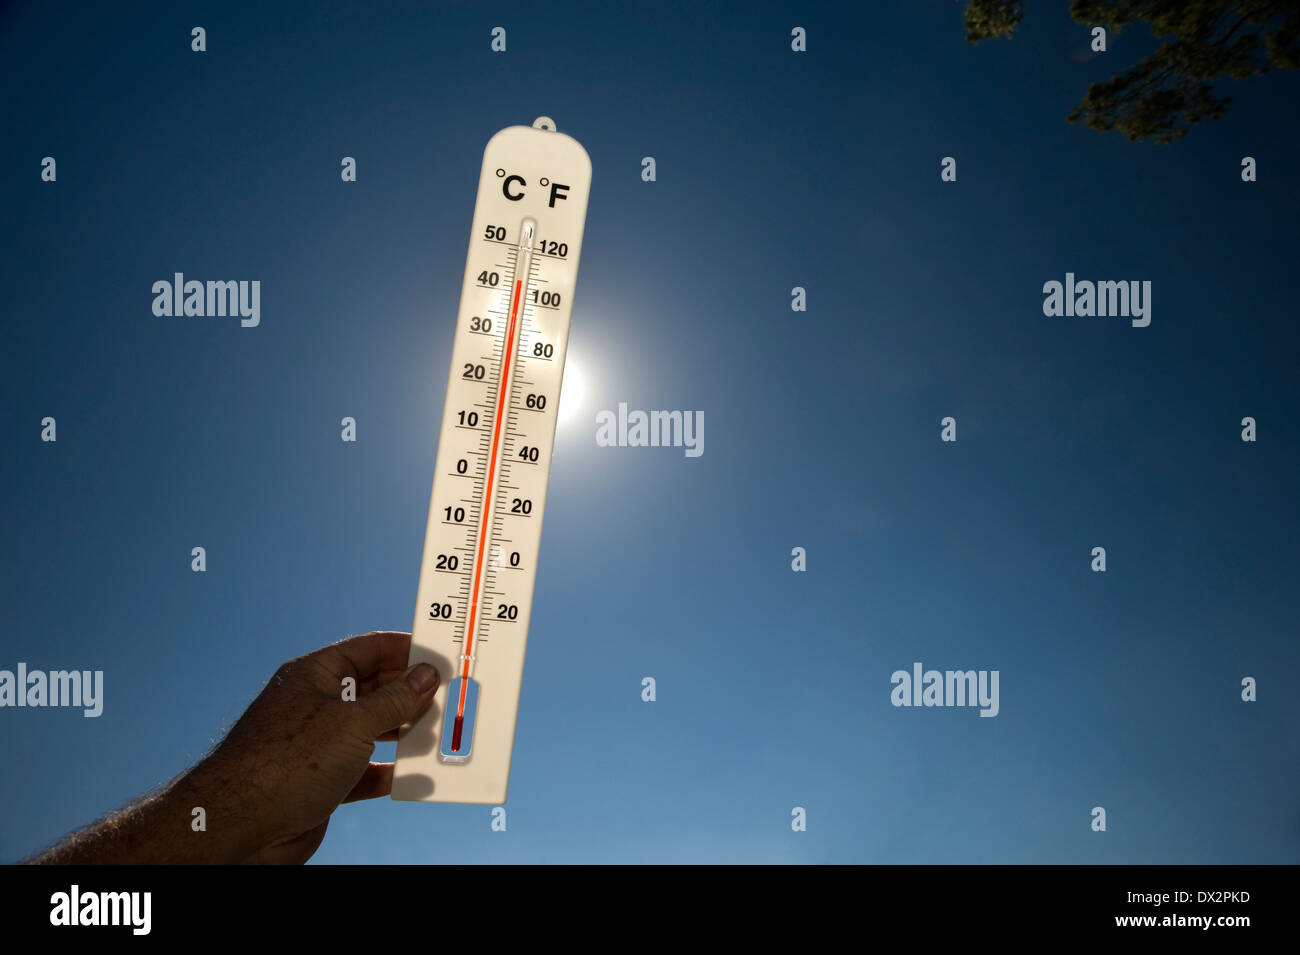 hot day heat sun scorching thermometer 40 degrees Stock Photo